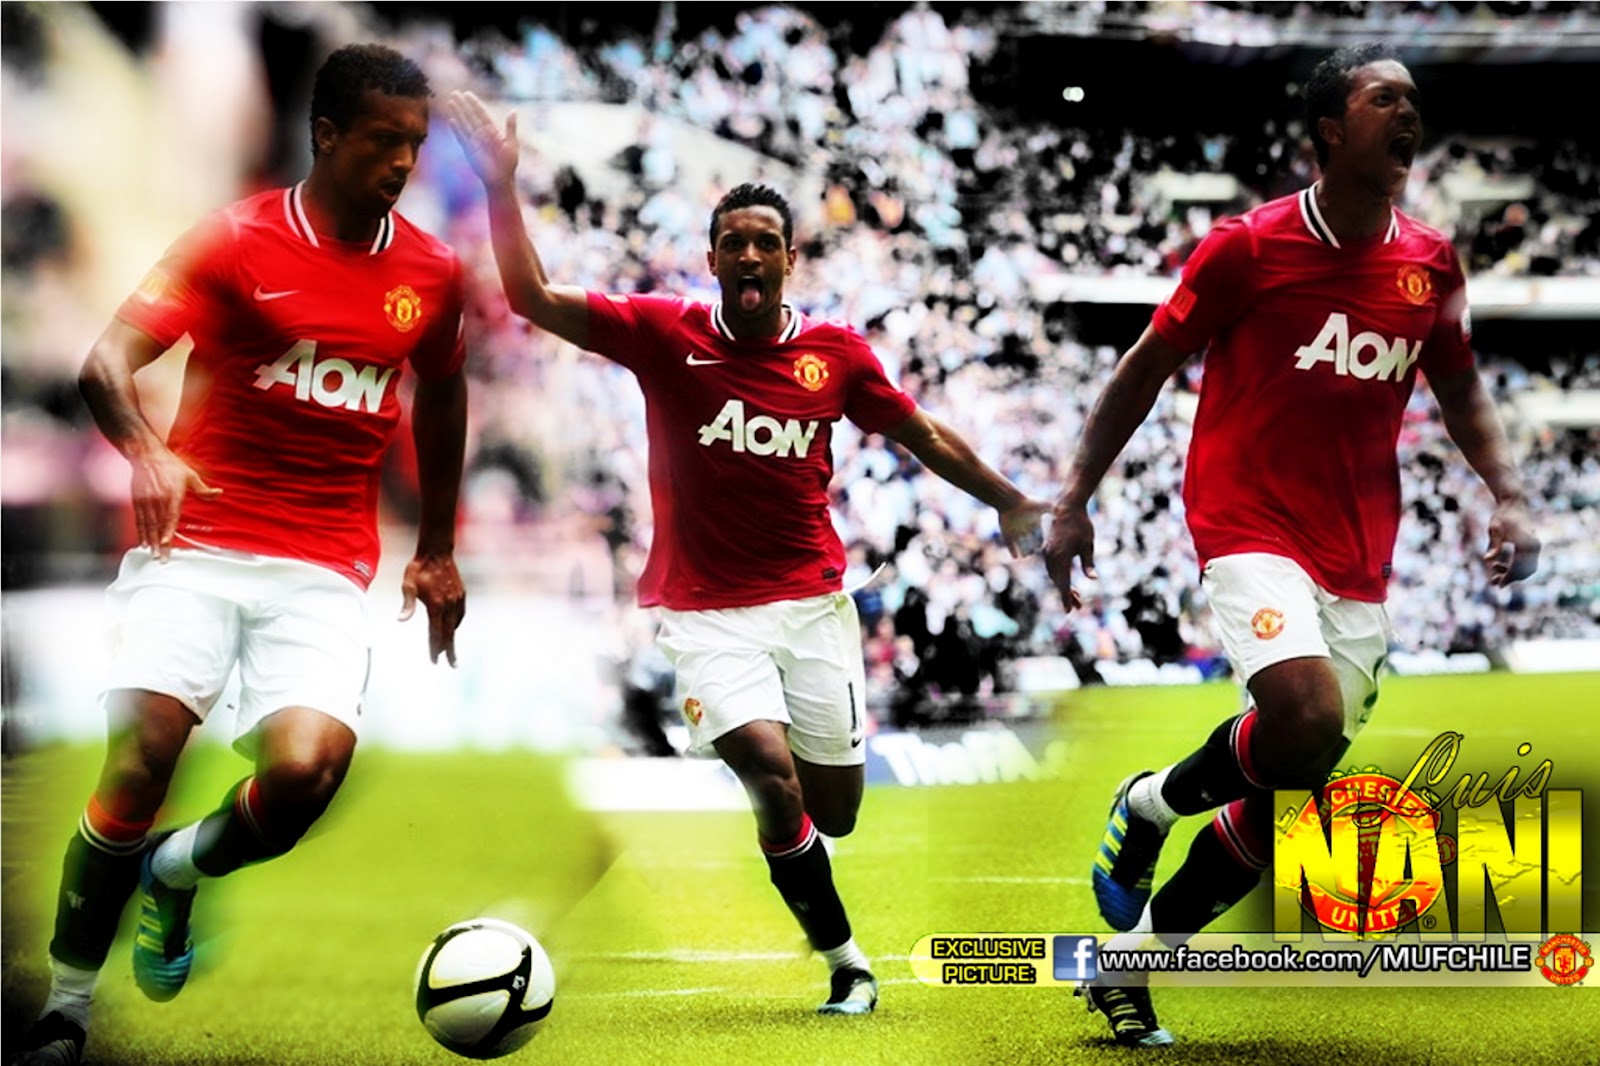 nani wallpapers,player,sports,soccer player,sports equipment,football player